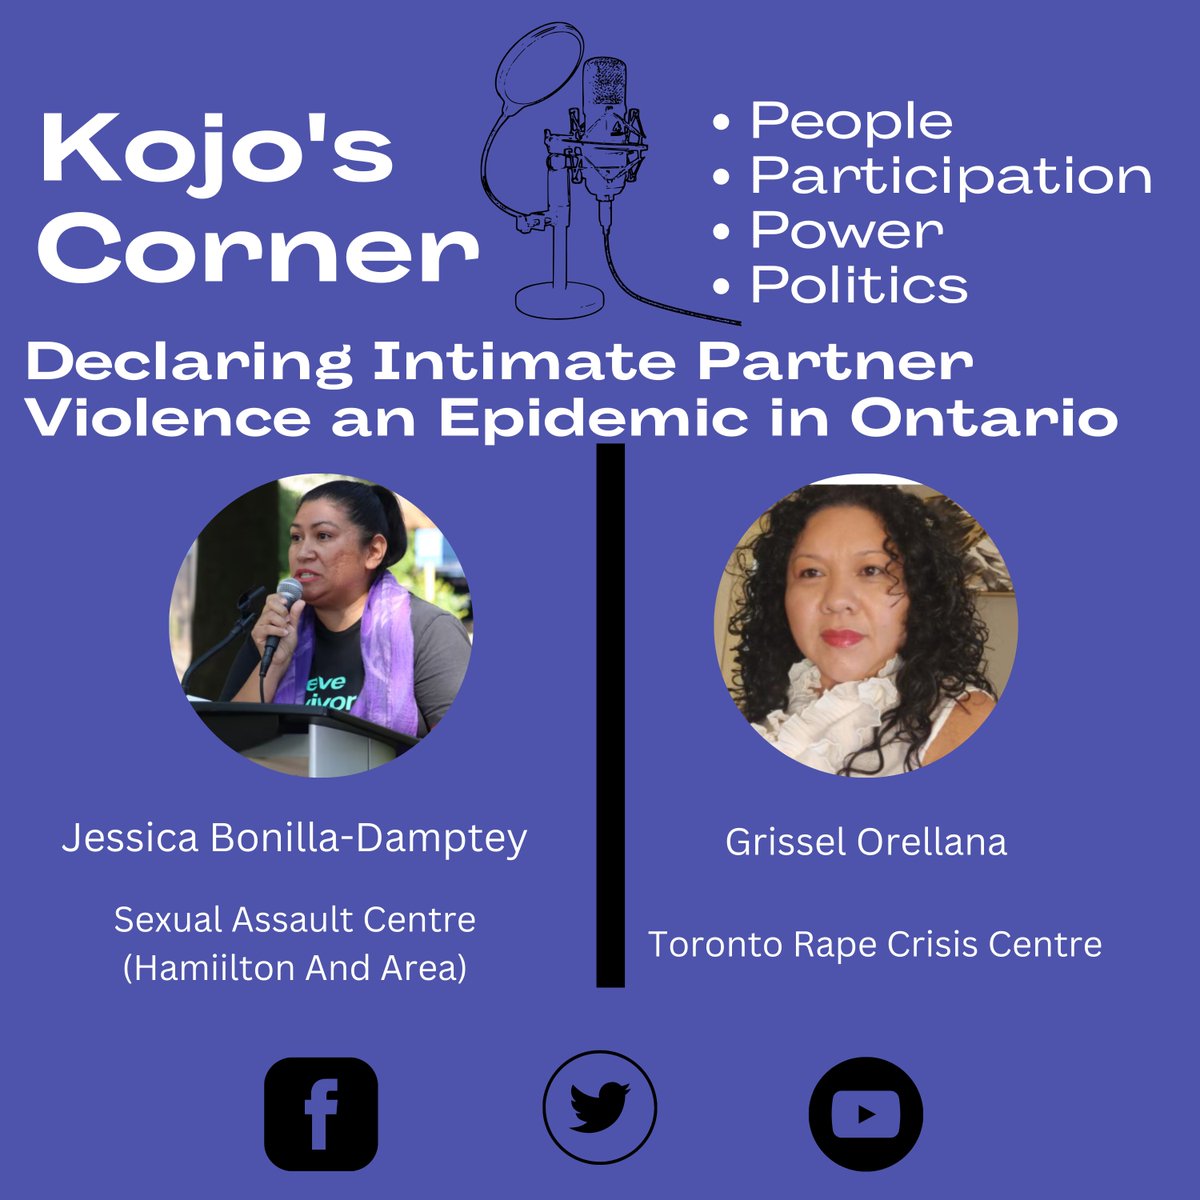 Episode 9 of Season 2, we are talking about 'Declaring Intimate Partner Violence an Epidemic in Ontario' - Bill 173 with @SACHAhamont & @trccmwar. 

Tune in on X or Youtube today from 5 pm to 6 pm.

youtube.com/live/lH01pwM2A…

#HamOnt #KojosCorner #onpoli